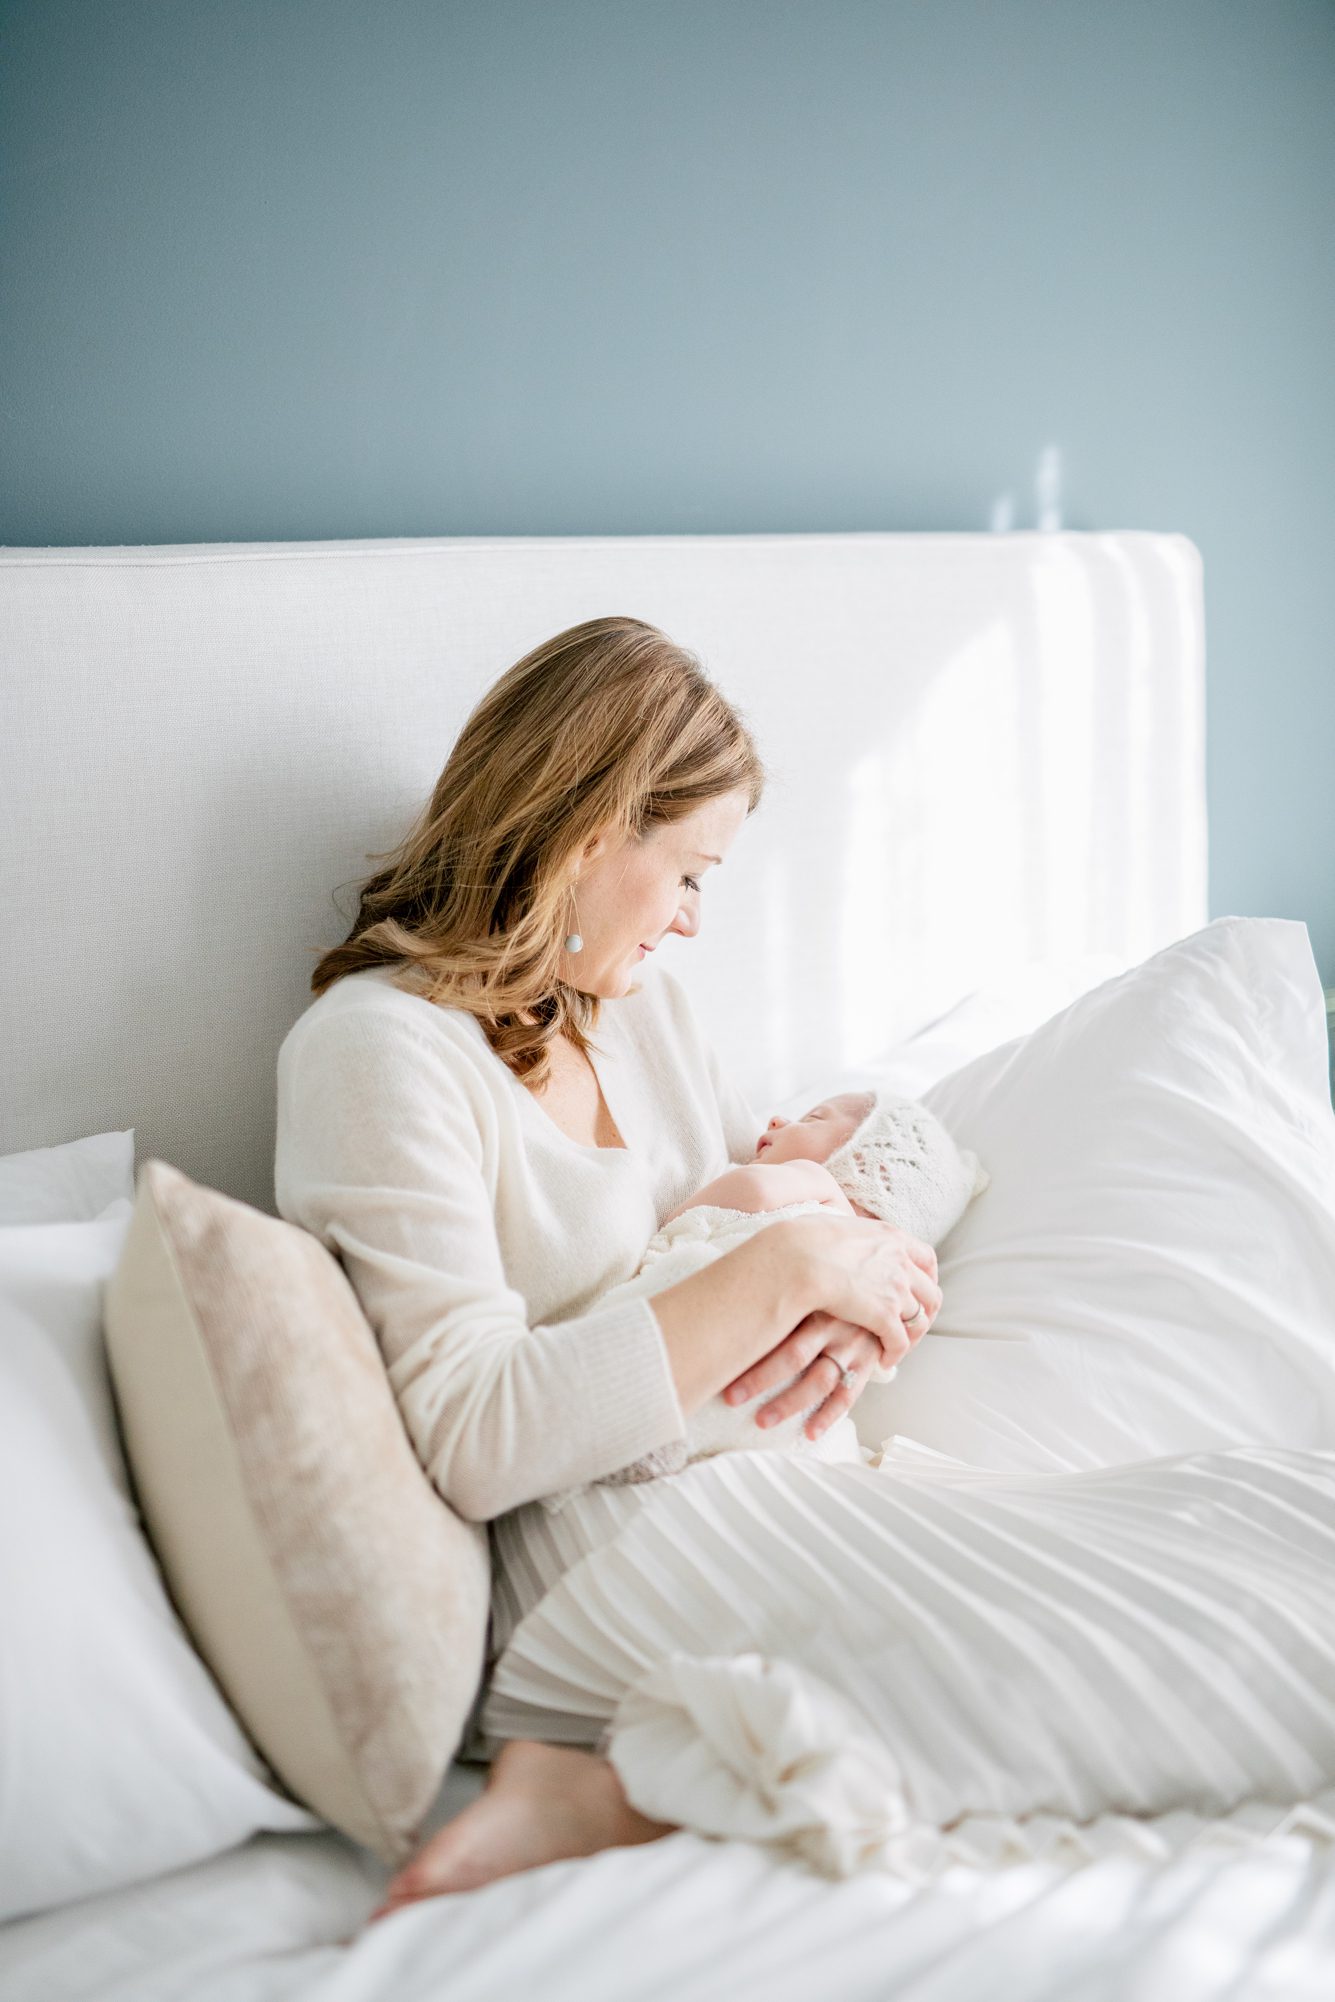 Mom relaxing on bed holding baby during newborn session. Photo by Chevy Chase DC newborn photographer, LRG Portraits.